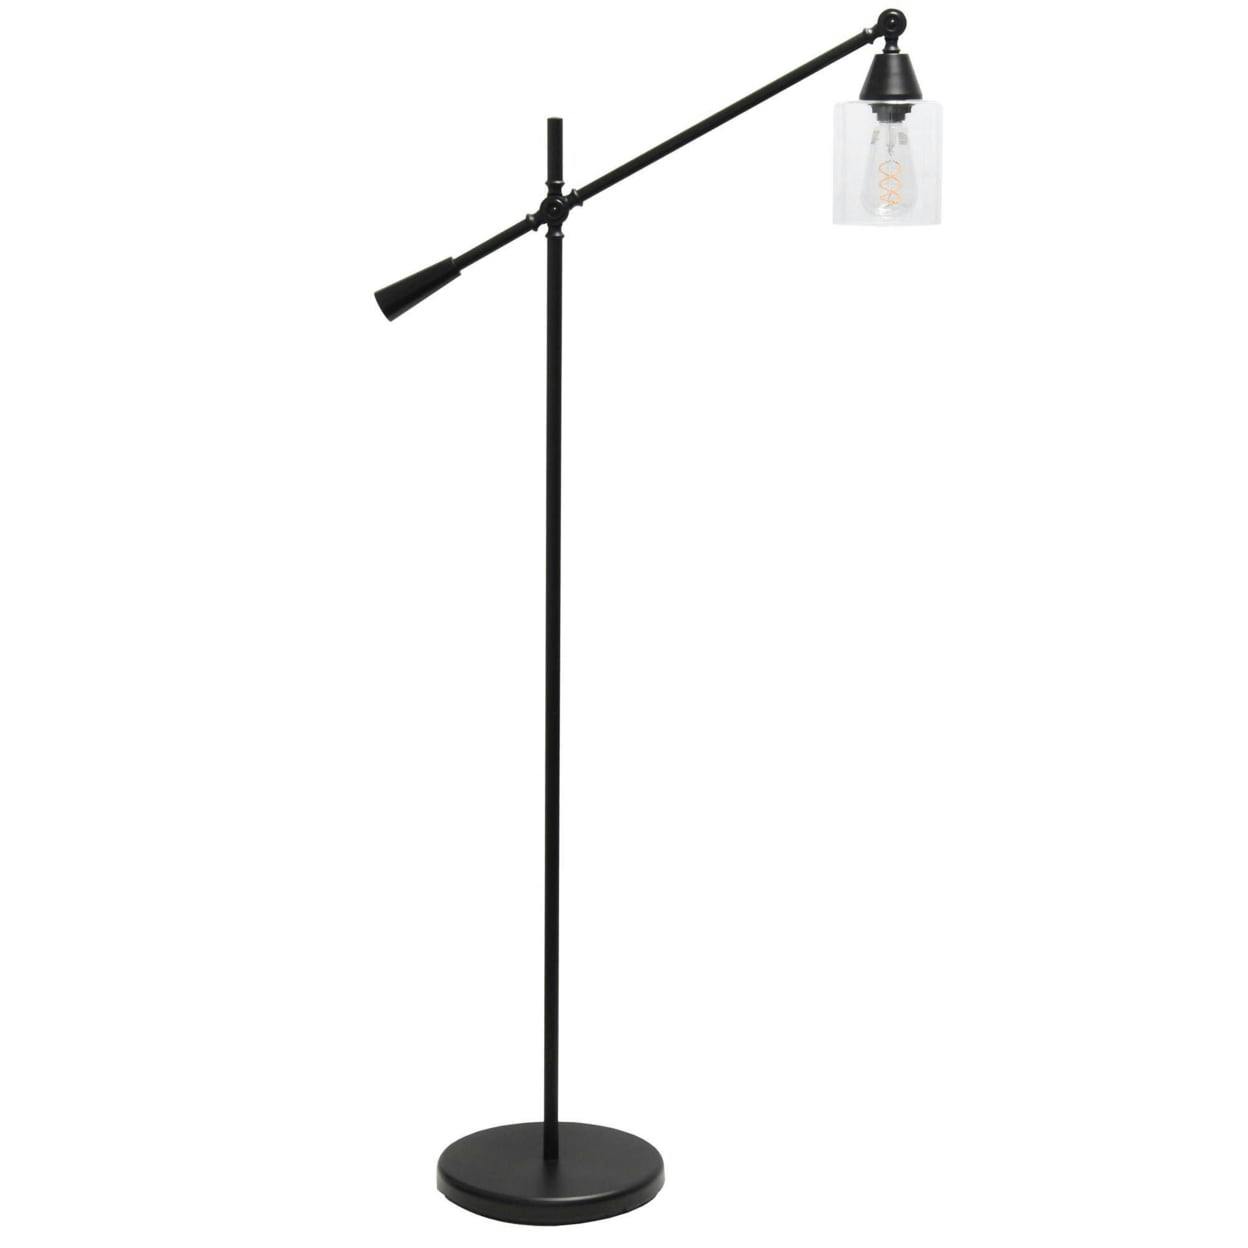 Edison-Inspired Adjustable Black Floor Lamp with Glass Shade